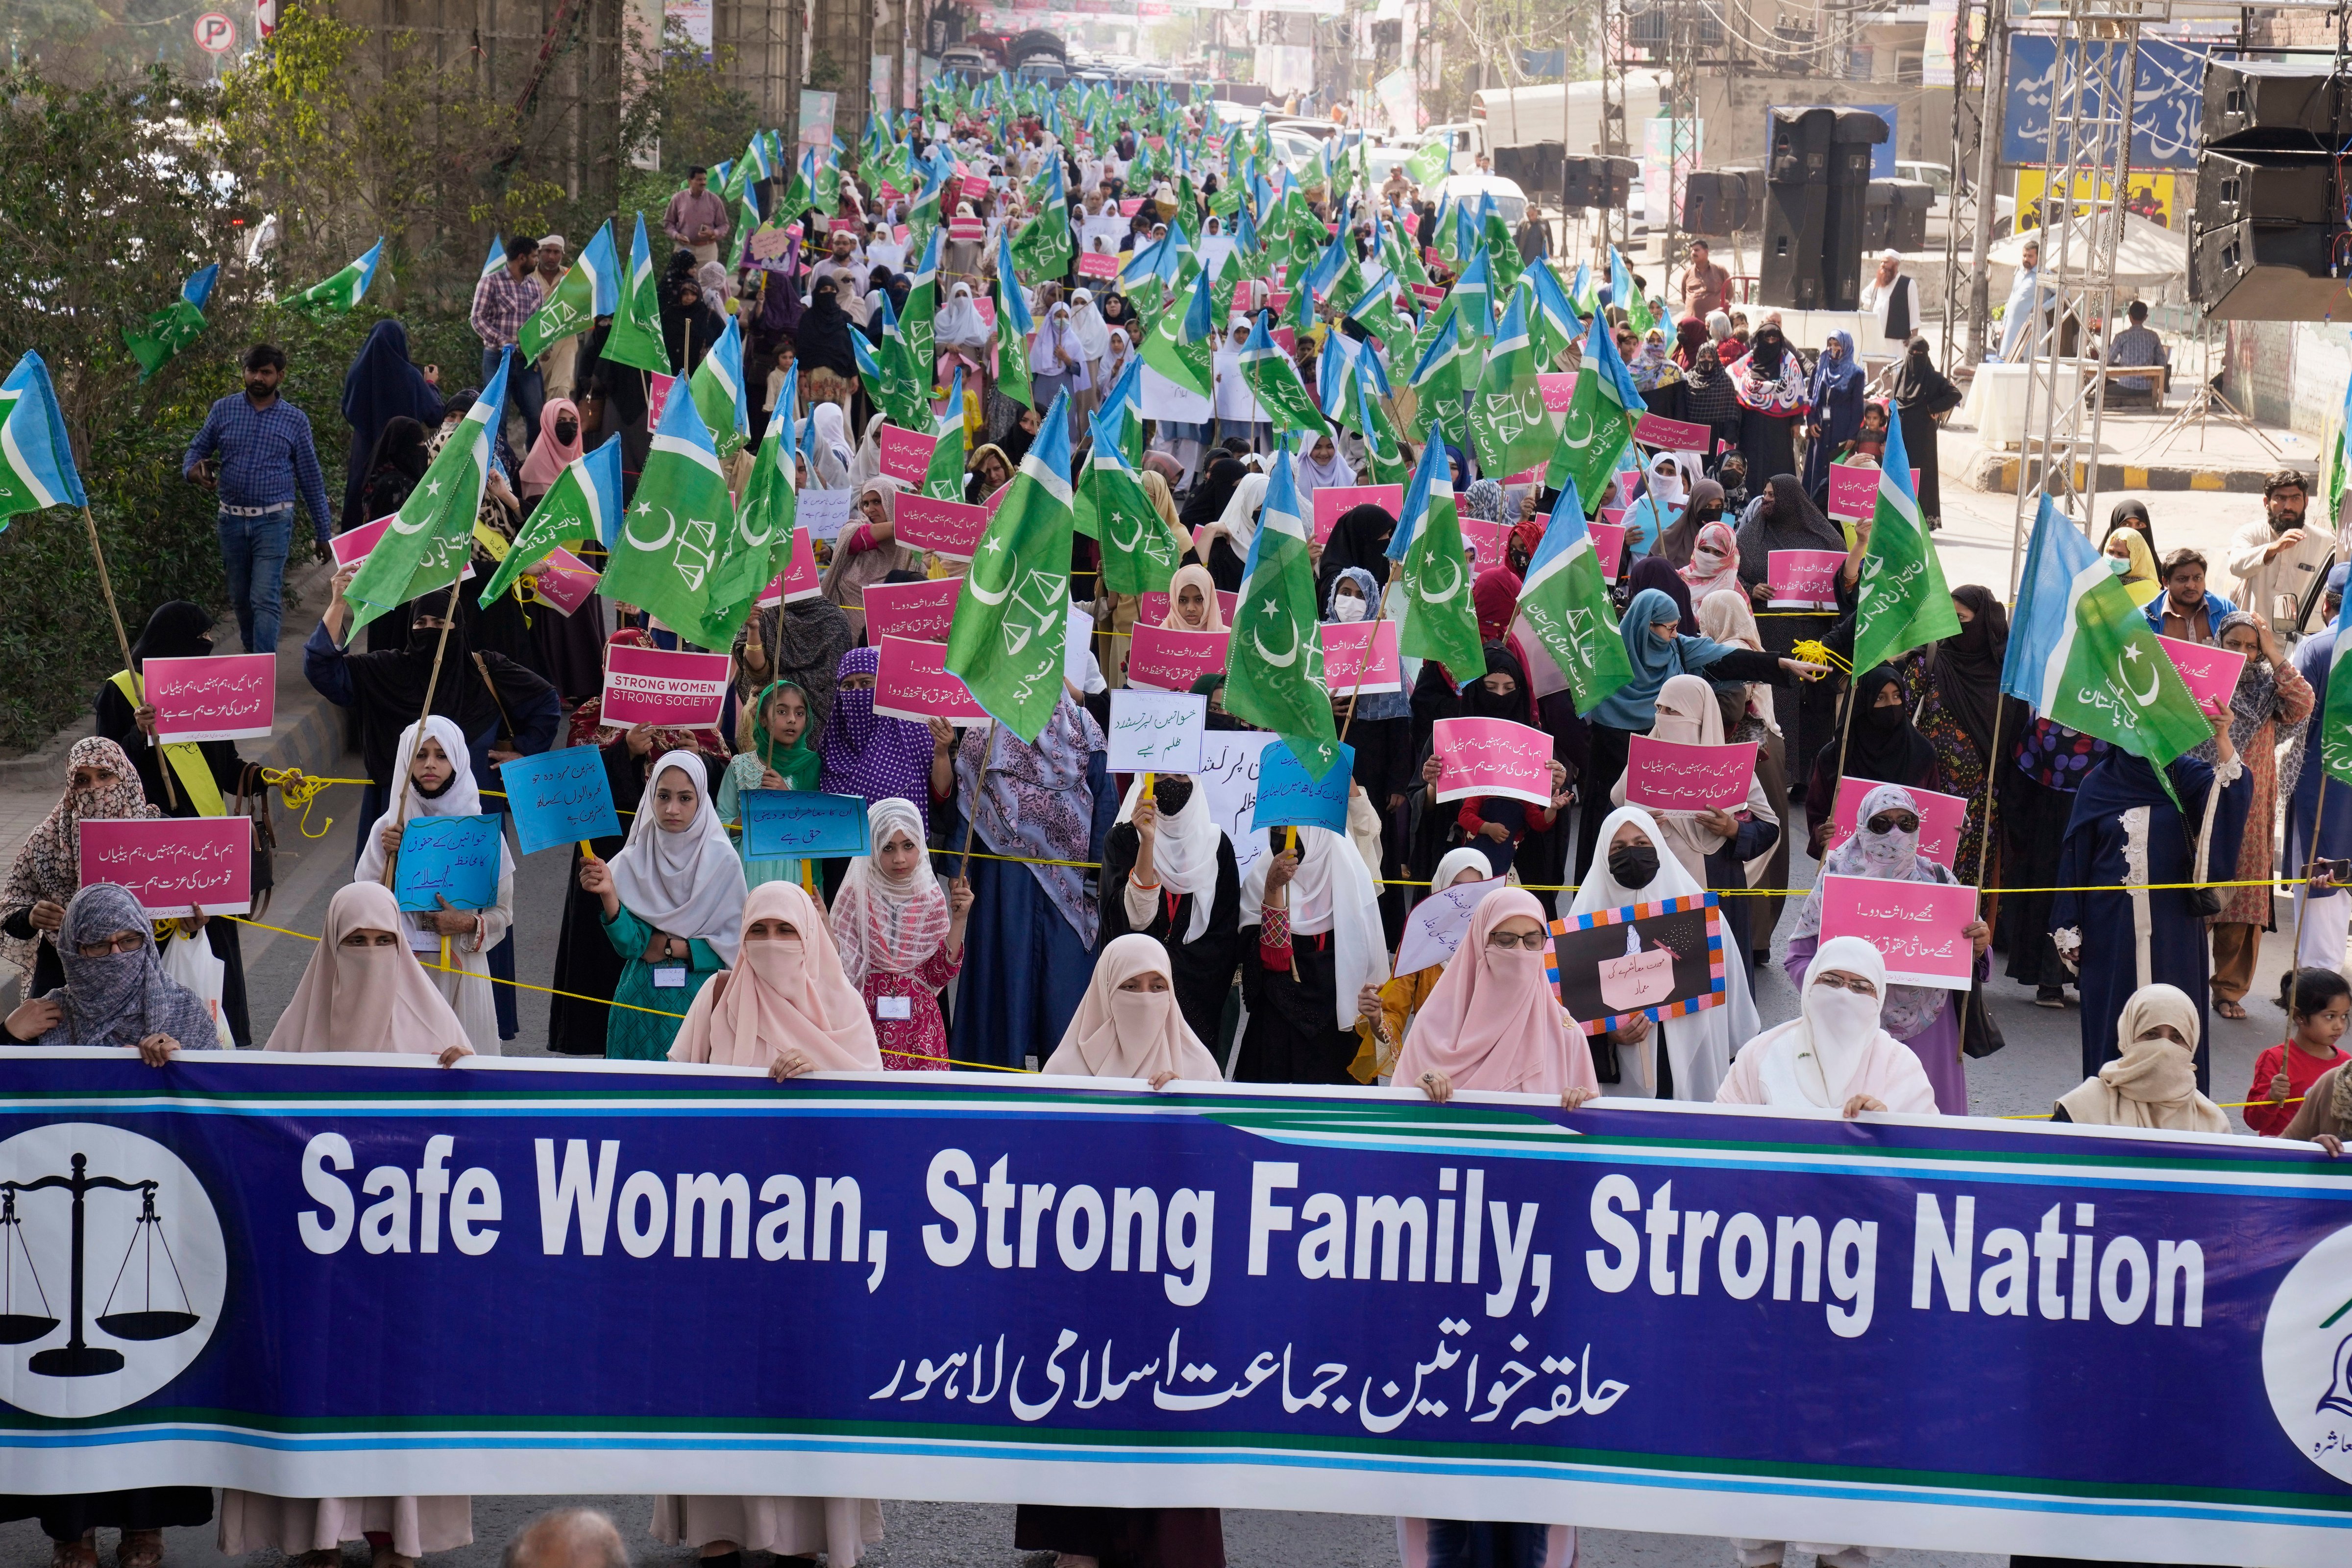 Women supporters of a religious party "Jamaat-e-Islami" participate in a rally to mark International Women's Day, in Lahore, Pakistan, Wednesday, March 8, 2023. (AP Photo/K.M. Chaudary)